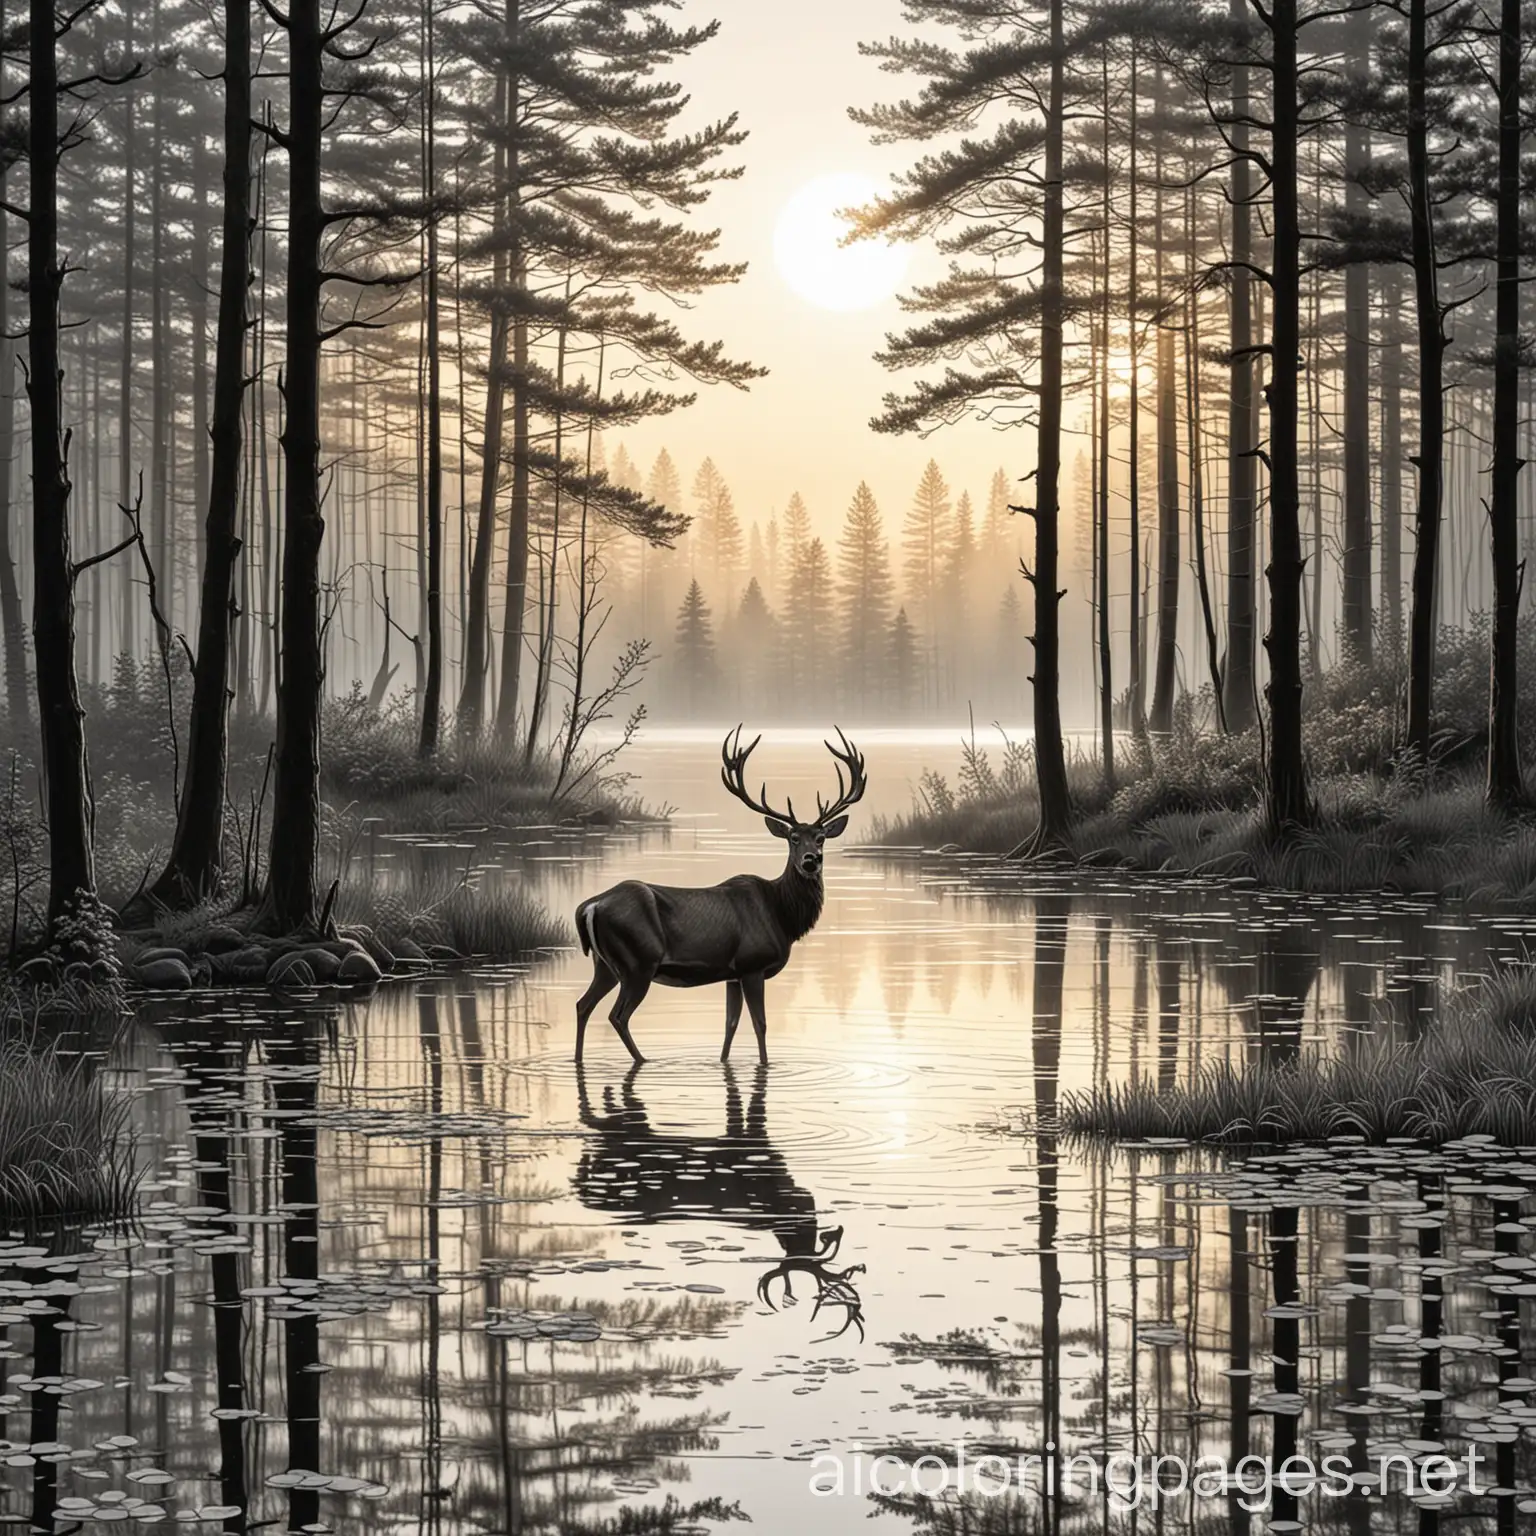 A silhouette of a majestic deer standing amidst gentle ripples in a tranquil forest pond, under the radiant glow of a setting or rising sun that casts an ethereal light through dense coniferous trees; evoking feelings of serenity and awe., illustration, painting, cinematic_; Coloring Page, black and white, line art, white background, Simplicity, Ample White Space. The background of the coloring page is plain white to make it easy for young children to color within the lines. The outlines of all the subjects are easy to distinguish, making it simple for kids to color without too much difficulty